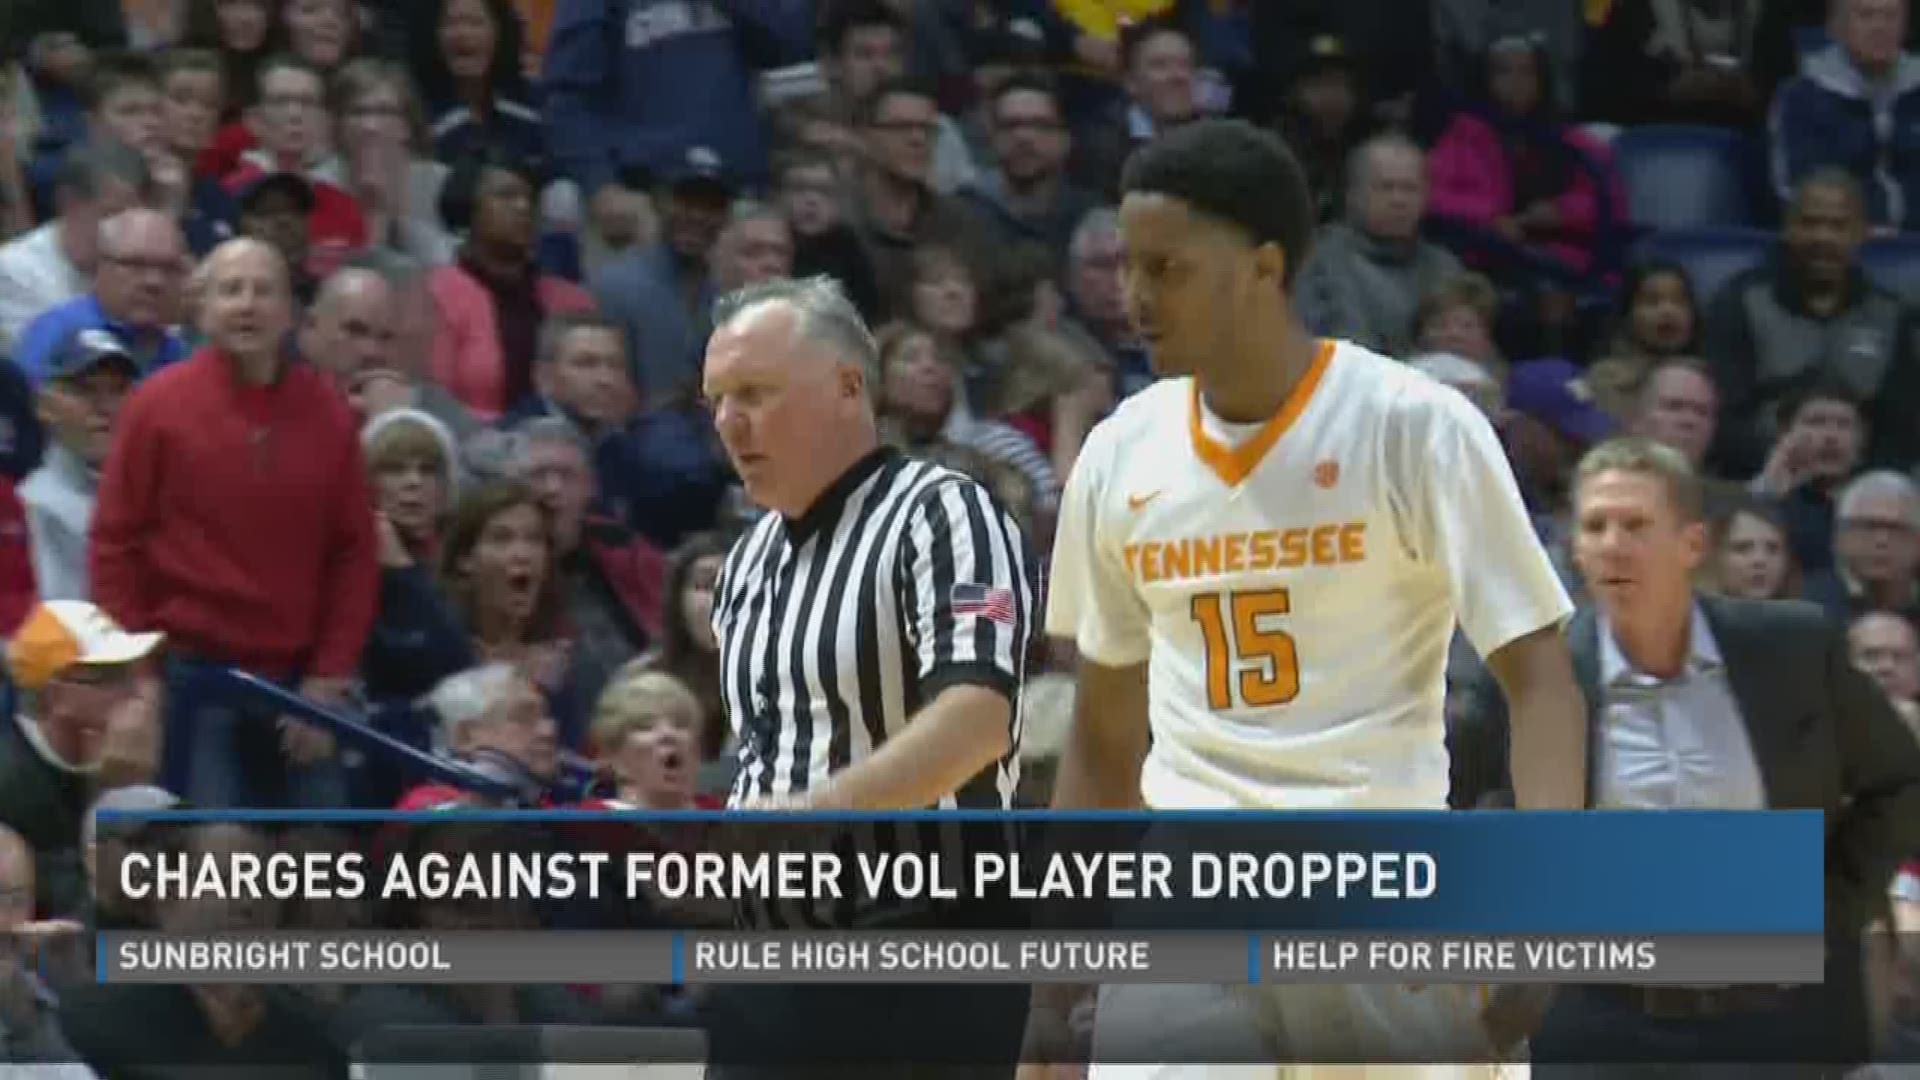 Jan. 26, 2017: The charges against former UT basketball player Detrick Mostella have been dismissed, as long as he keeps a clean record for the next six months.